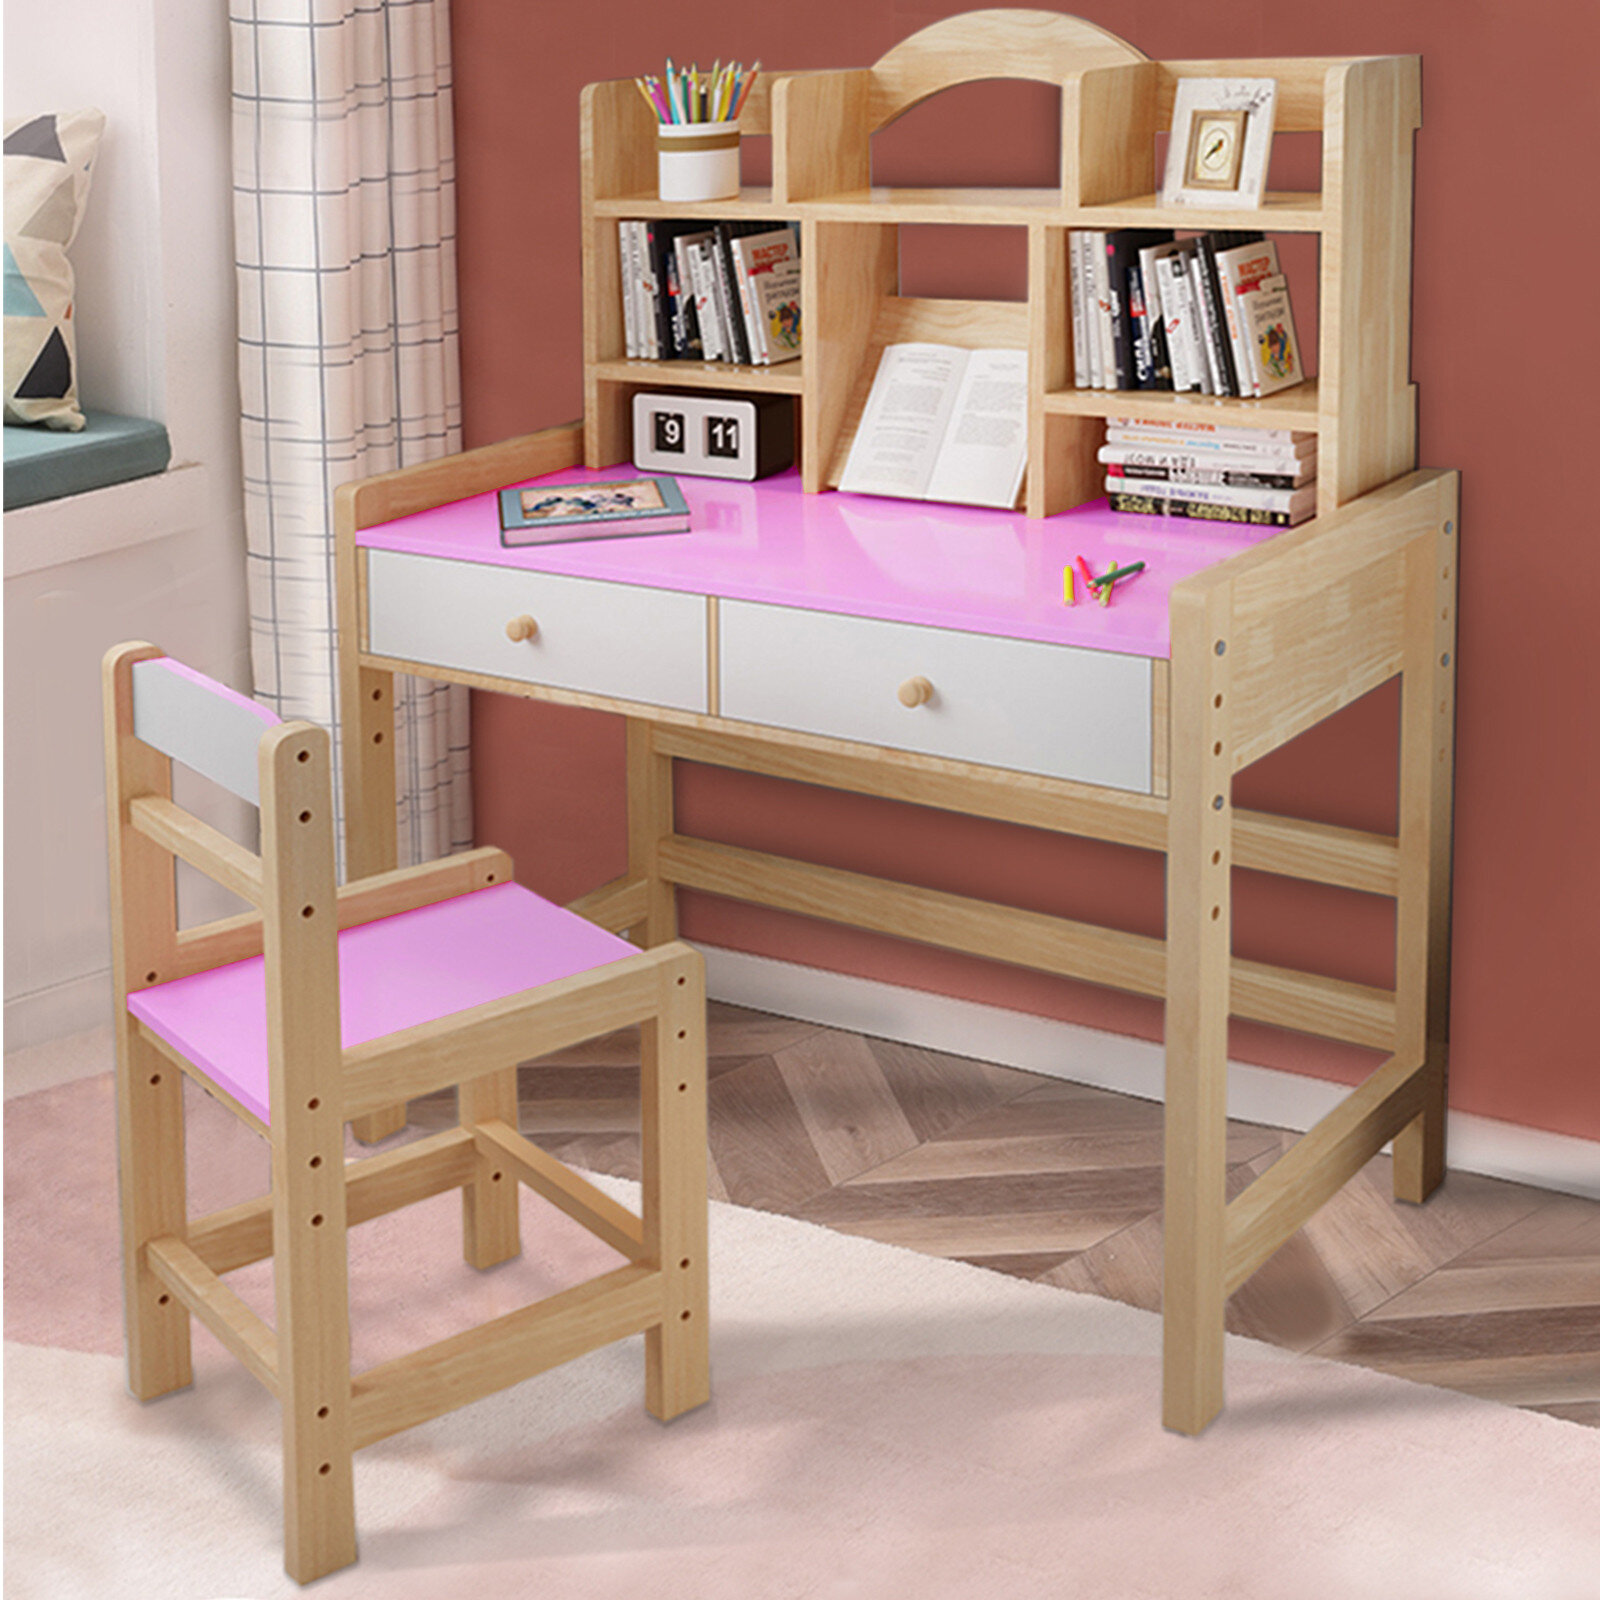 Harriet Bee Adjustable Height Wooden Student Desk And Chair Set With Drawers And Bookshelves